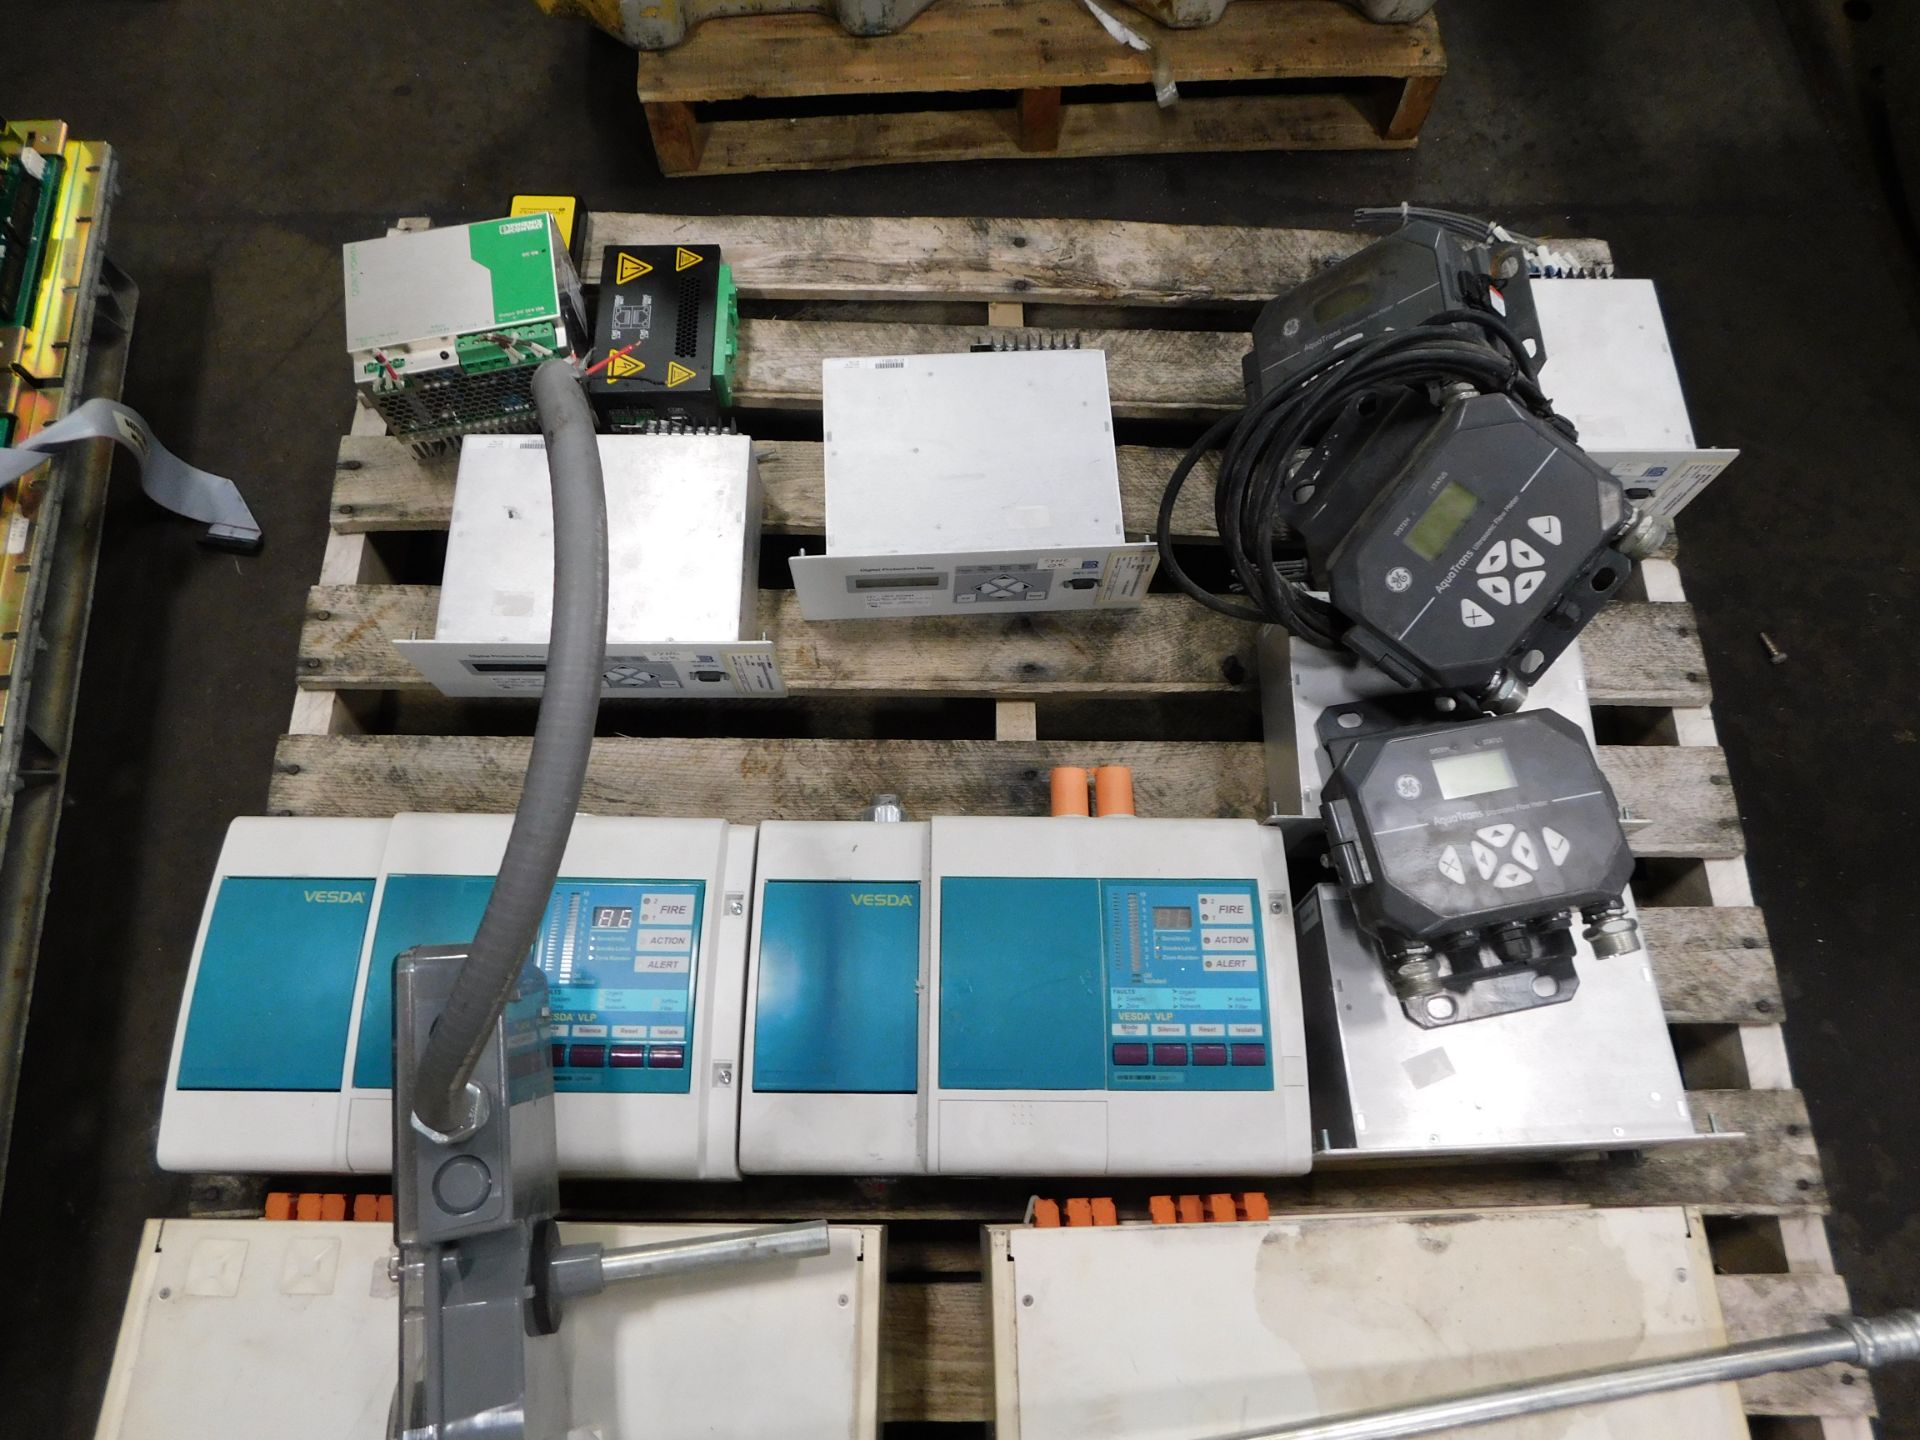 Pallet of Miscellaneous Testing Equipment - Teledyne, GE, etc. - Image 5 of 6